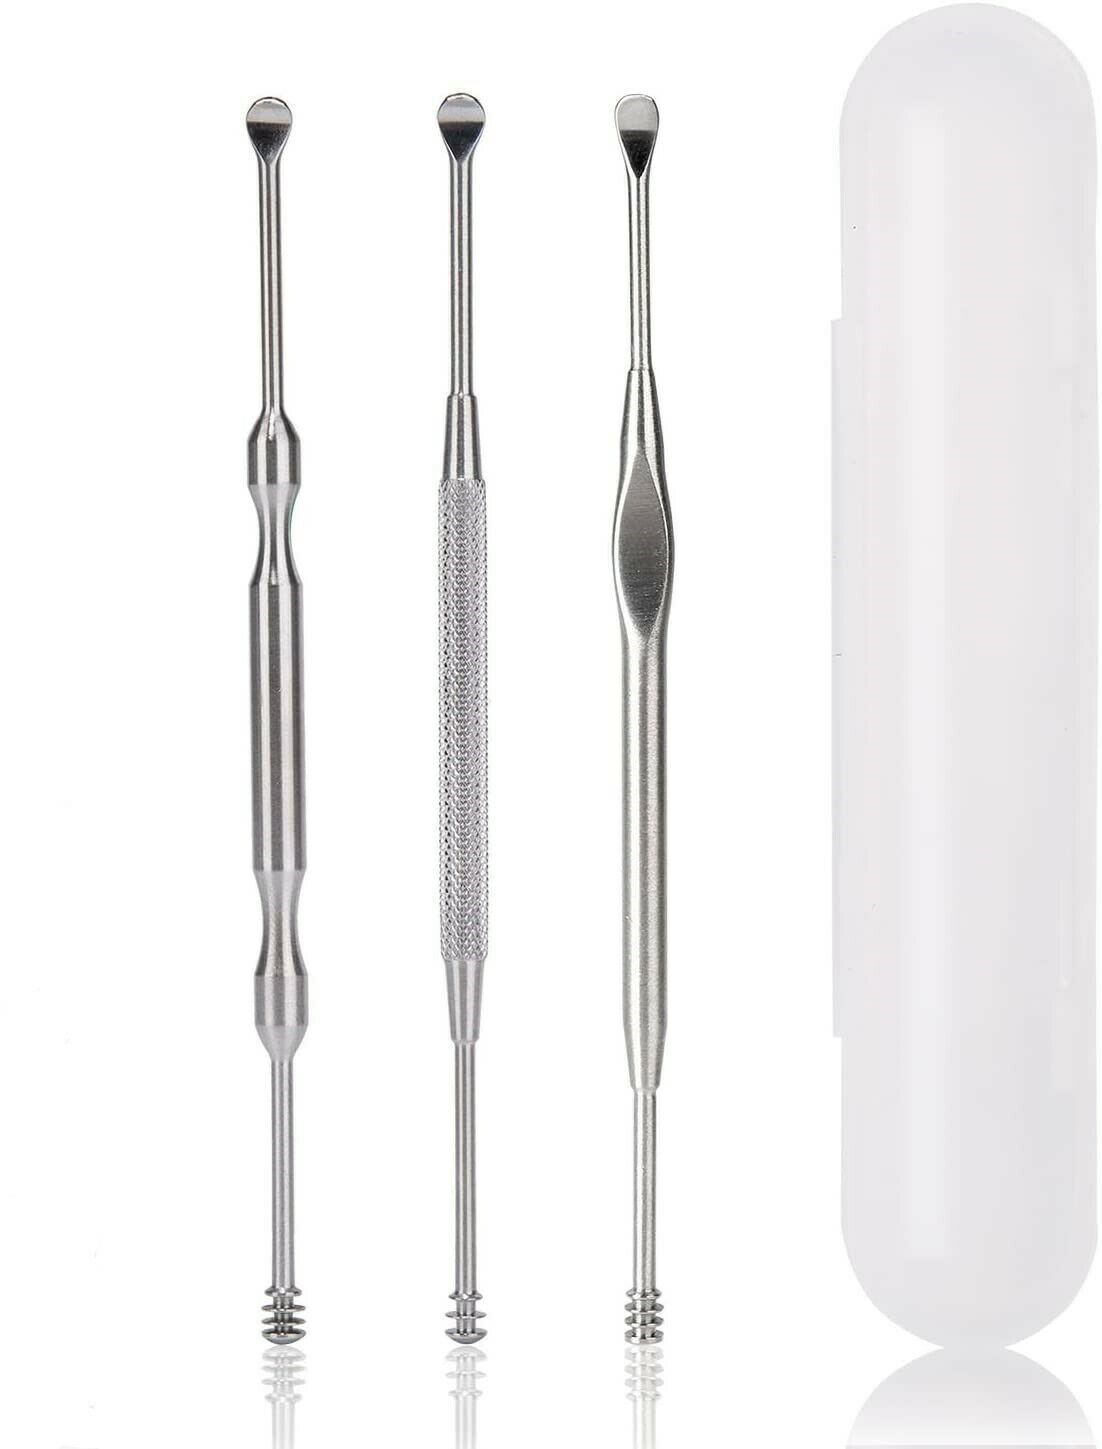 3pcs Ear Pick Cleaning Set Ear Wax Remover Cleaner Curette Kit Stainless Steel